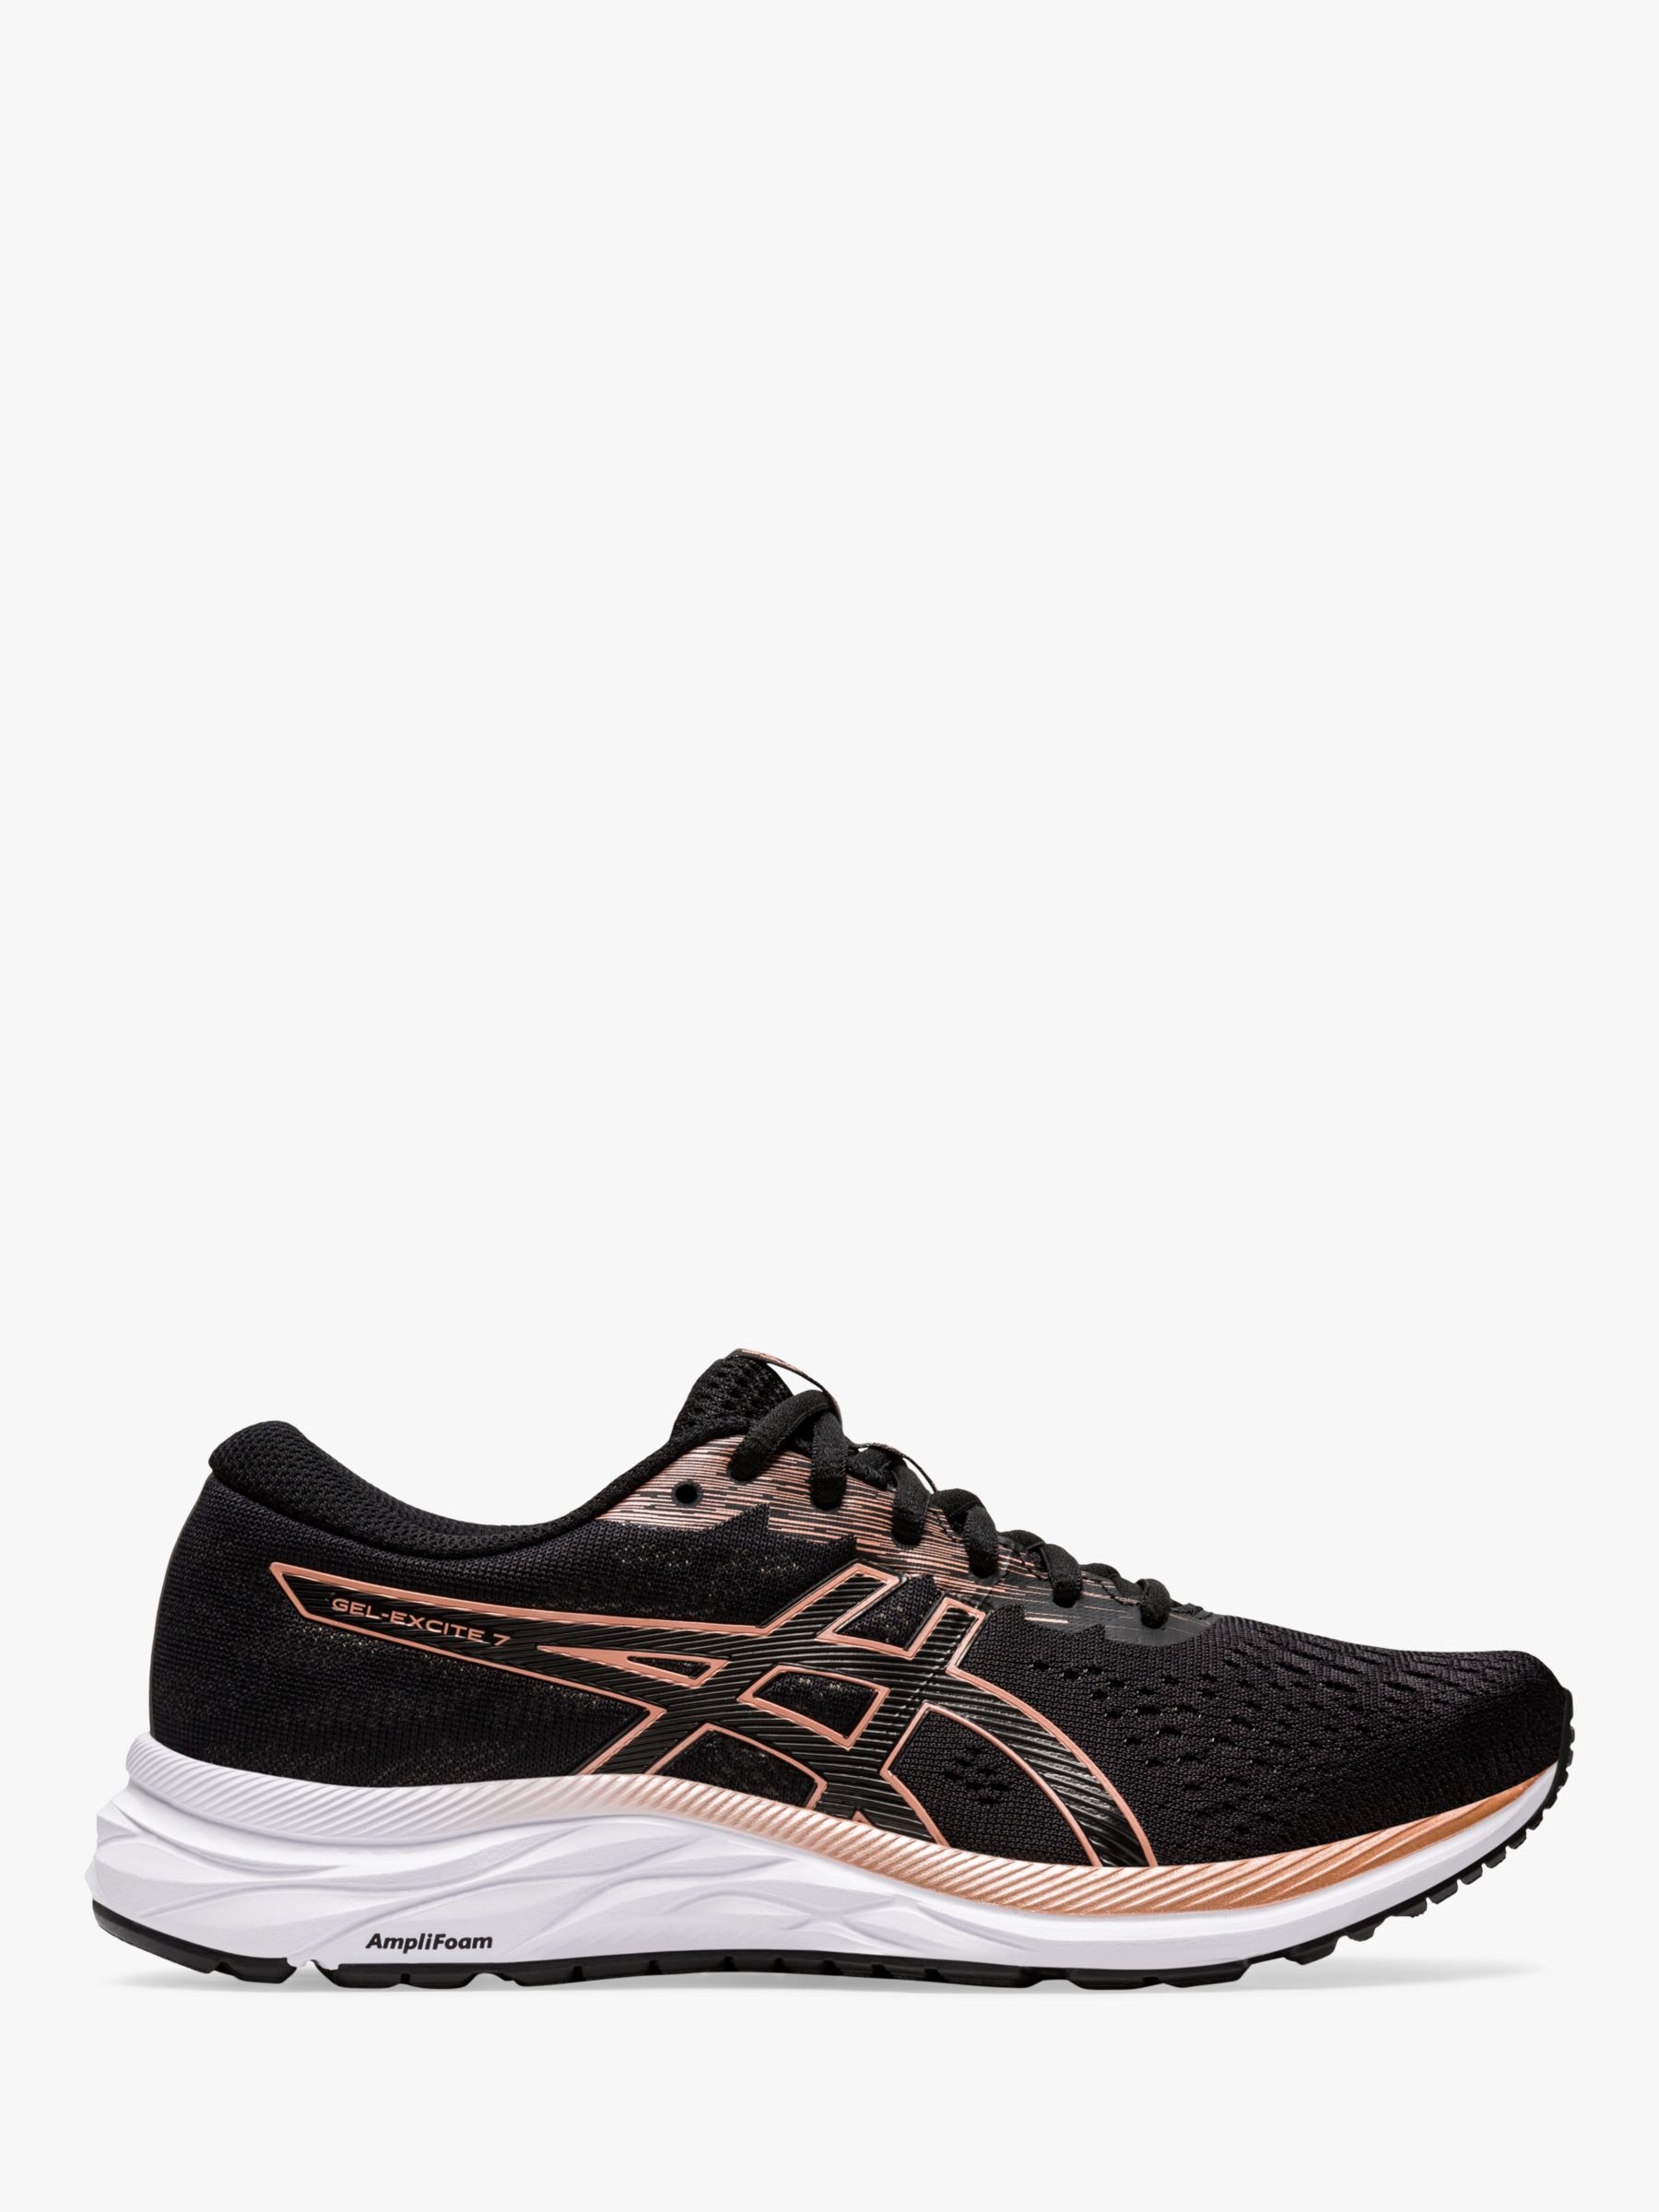 black and gold womens running shoes